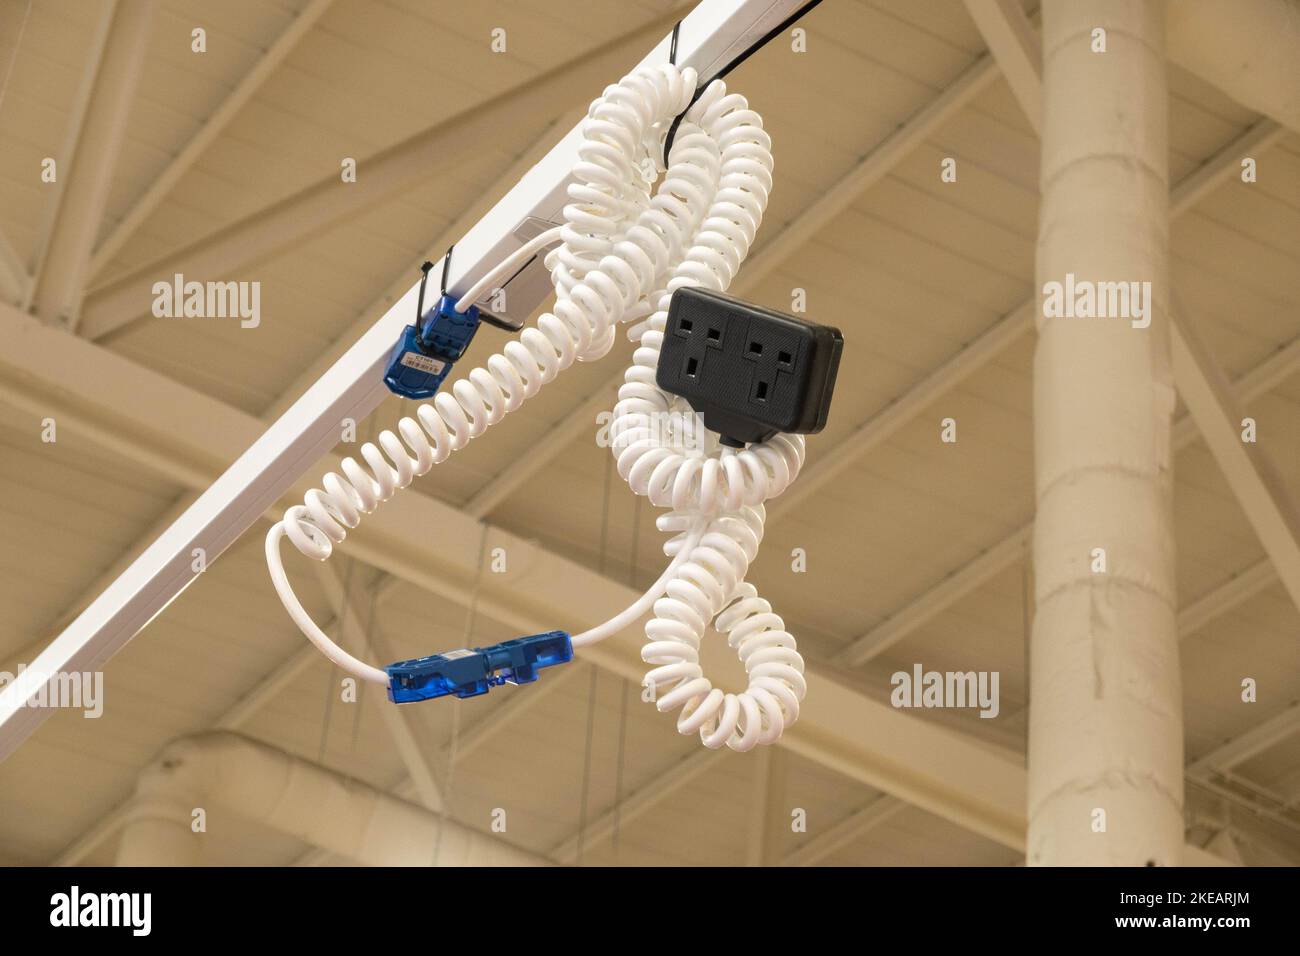 Why Use Cable Trunking For Your Electrical Installations